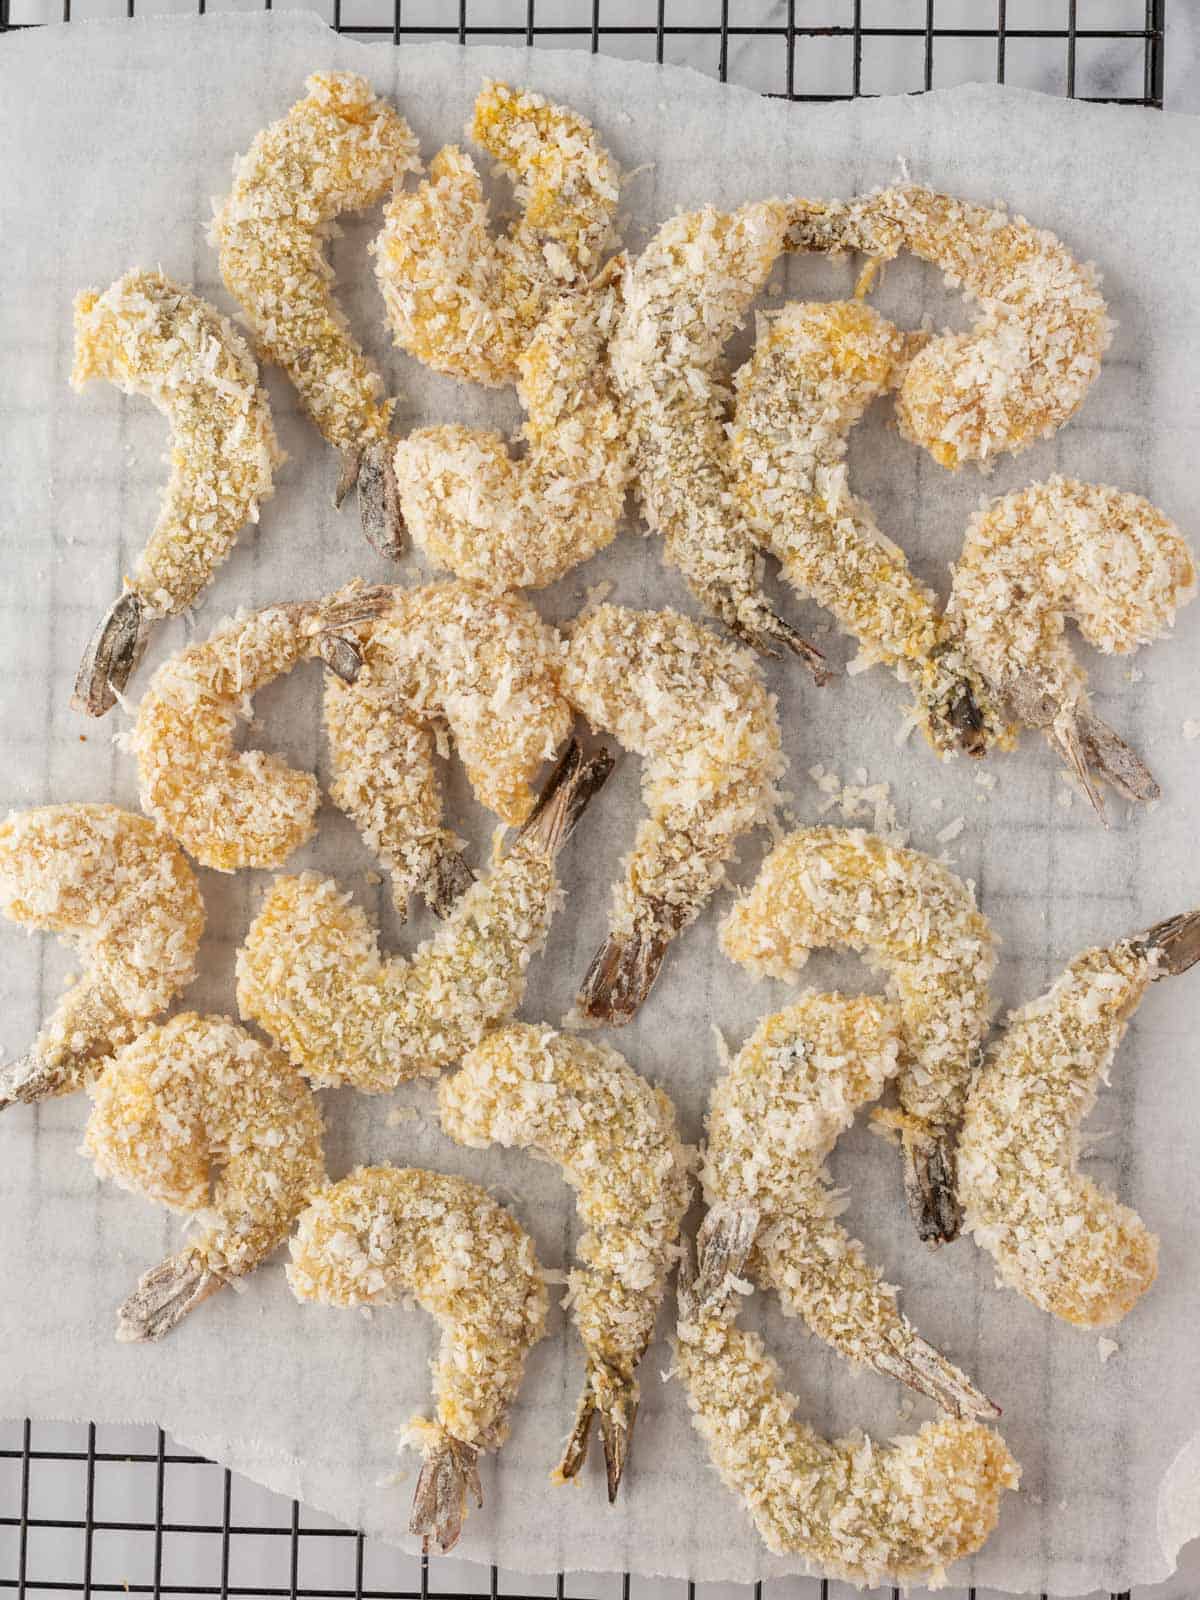 Coated shrimp resting on parchment before air frying.